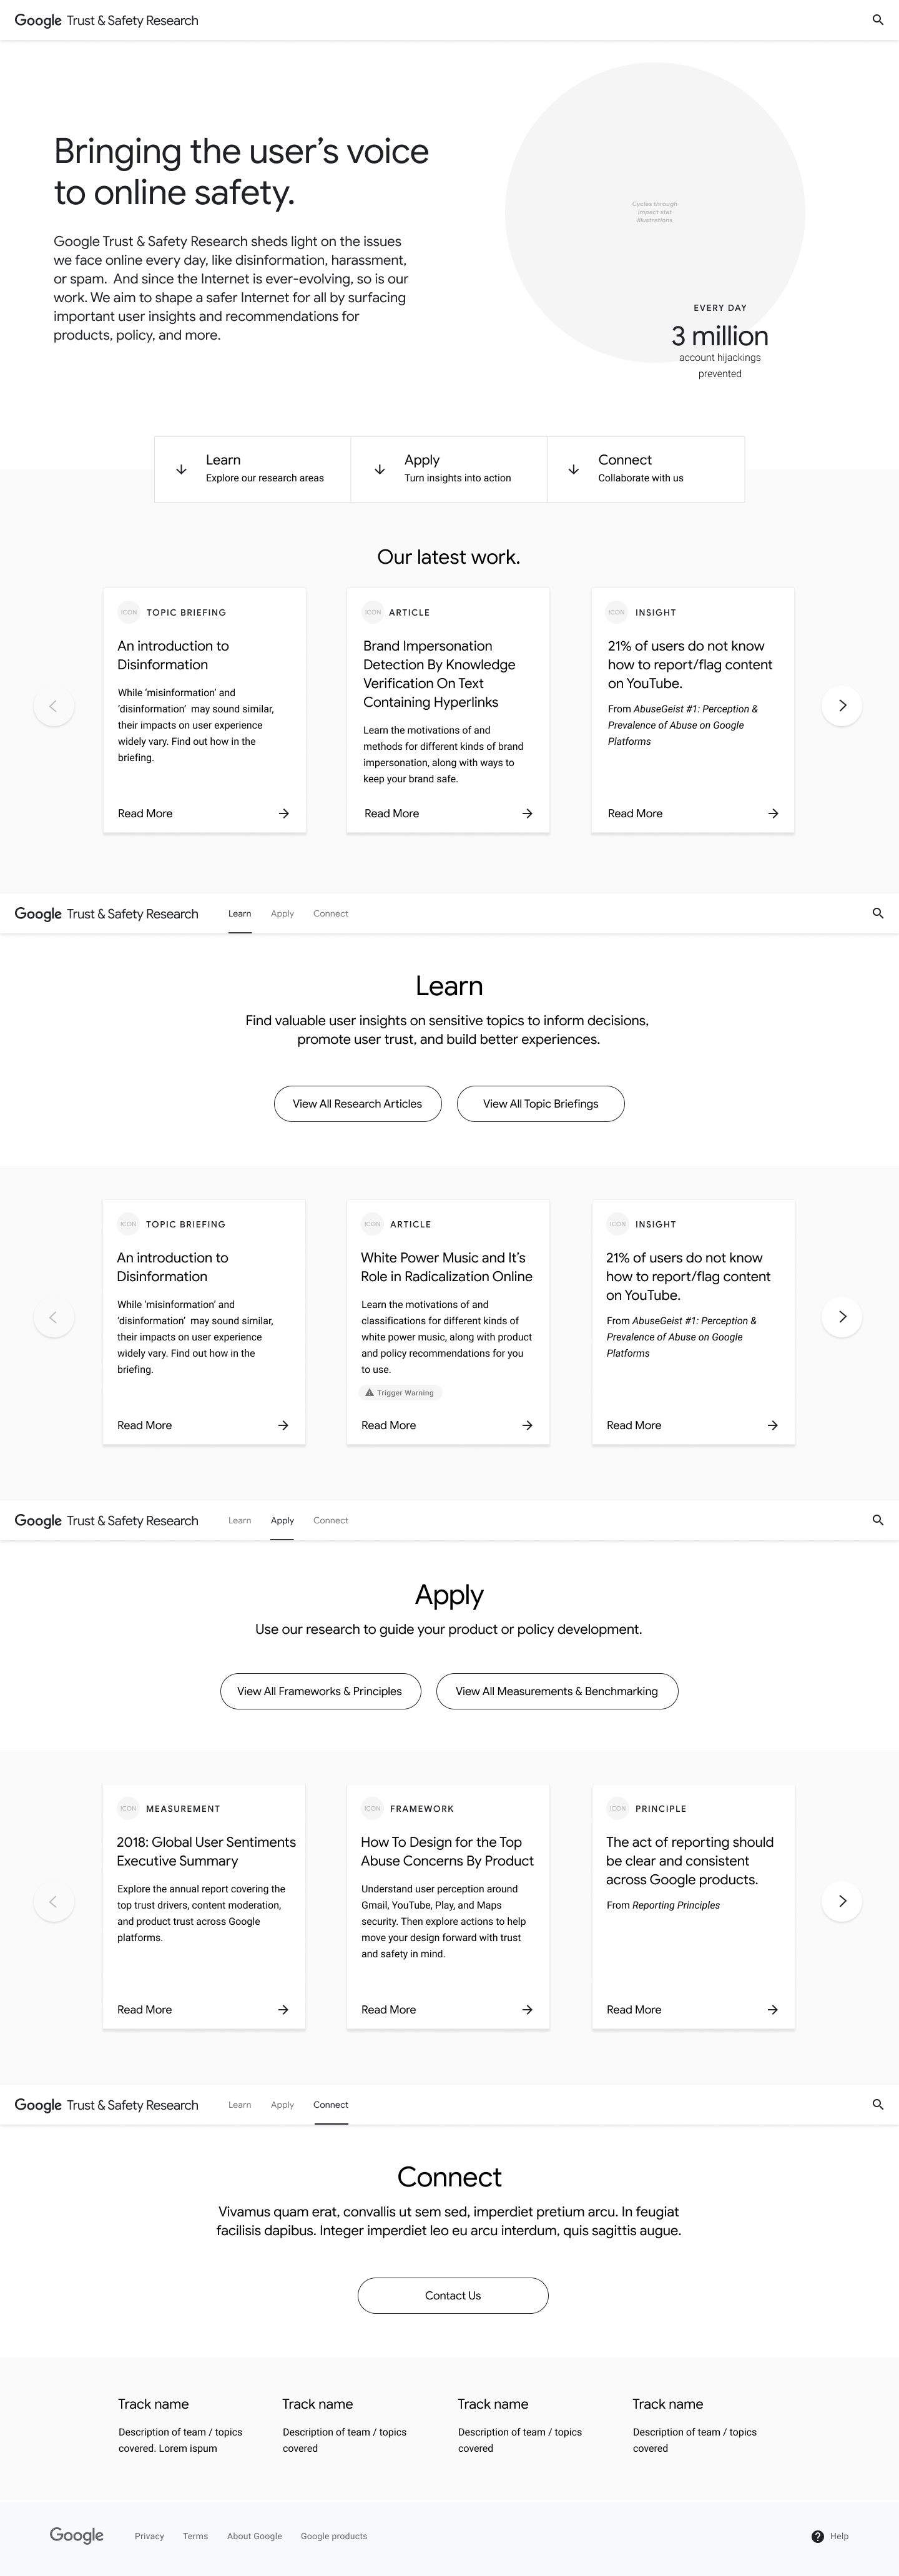 Selected Landing Page wireframe. This option heroes the mission and impact stats, then dives deeper into the research content.